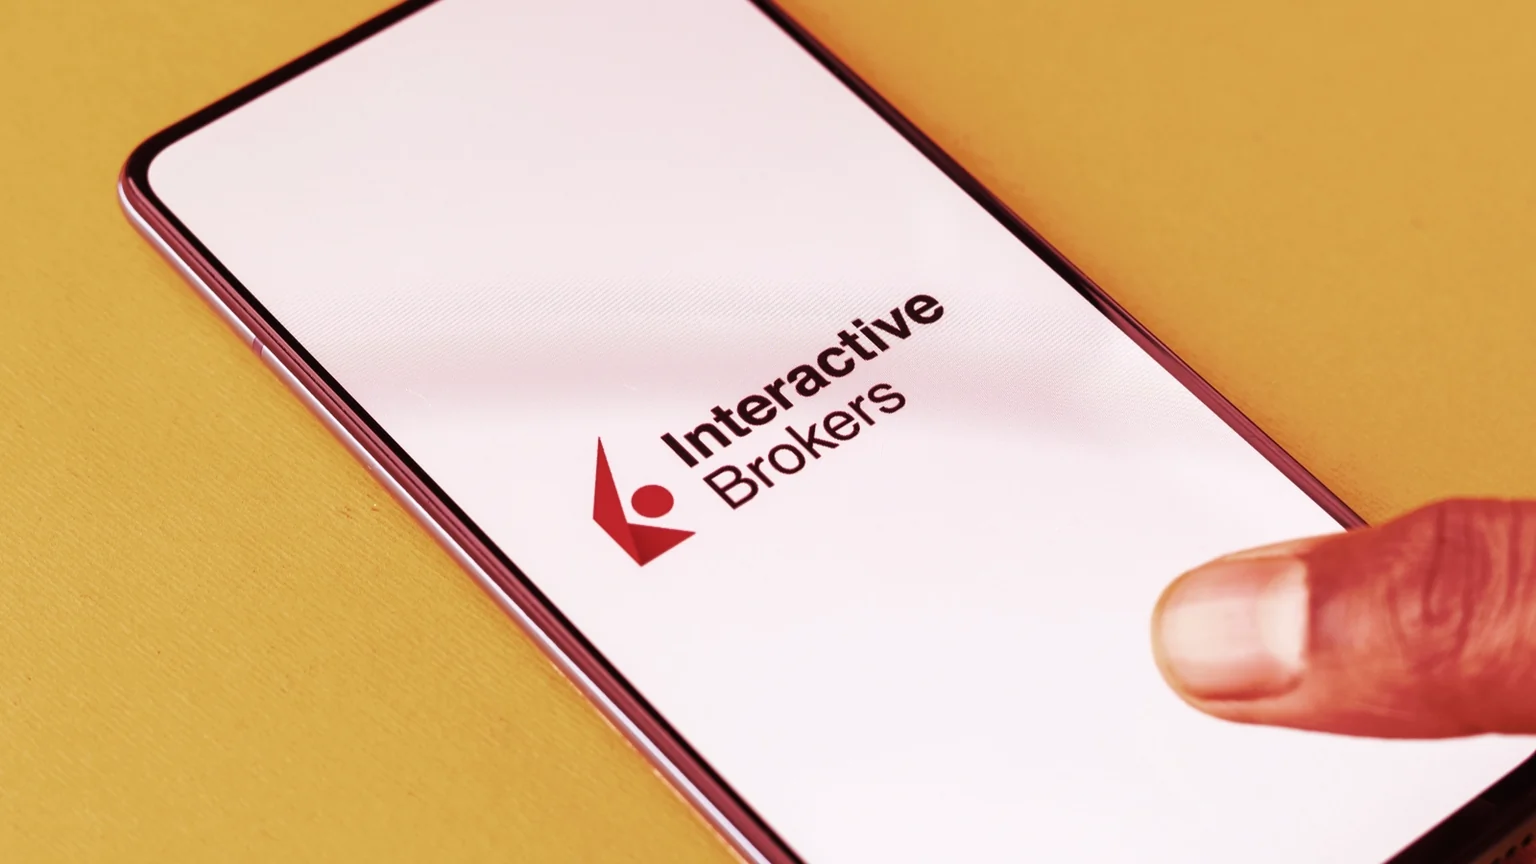 Interactive Brokers is a digital broker that lets traders buy and sell financial instruments. Image: Shutterstock